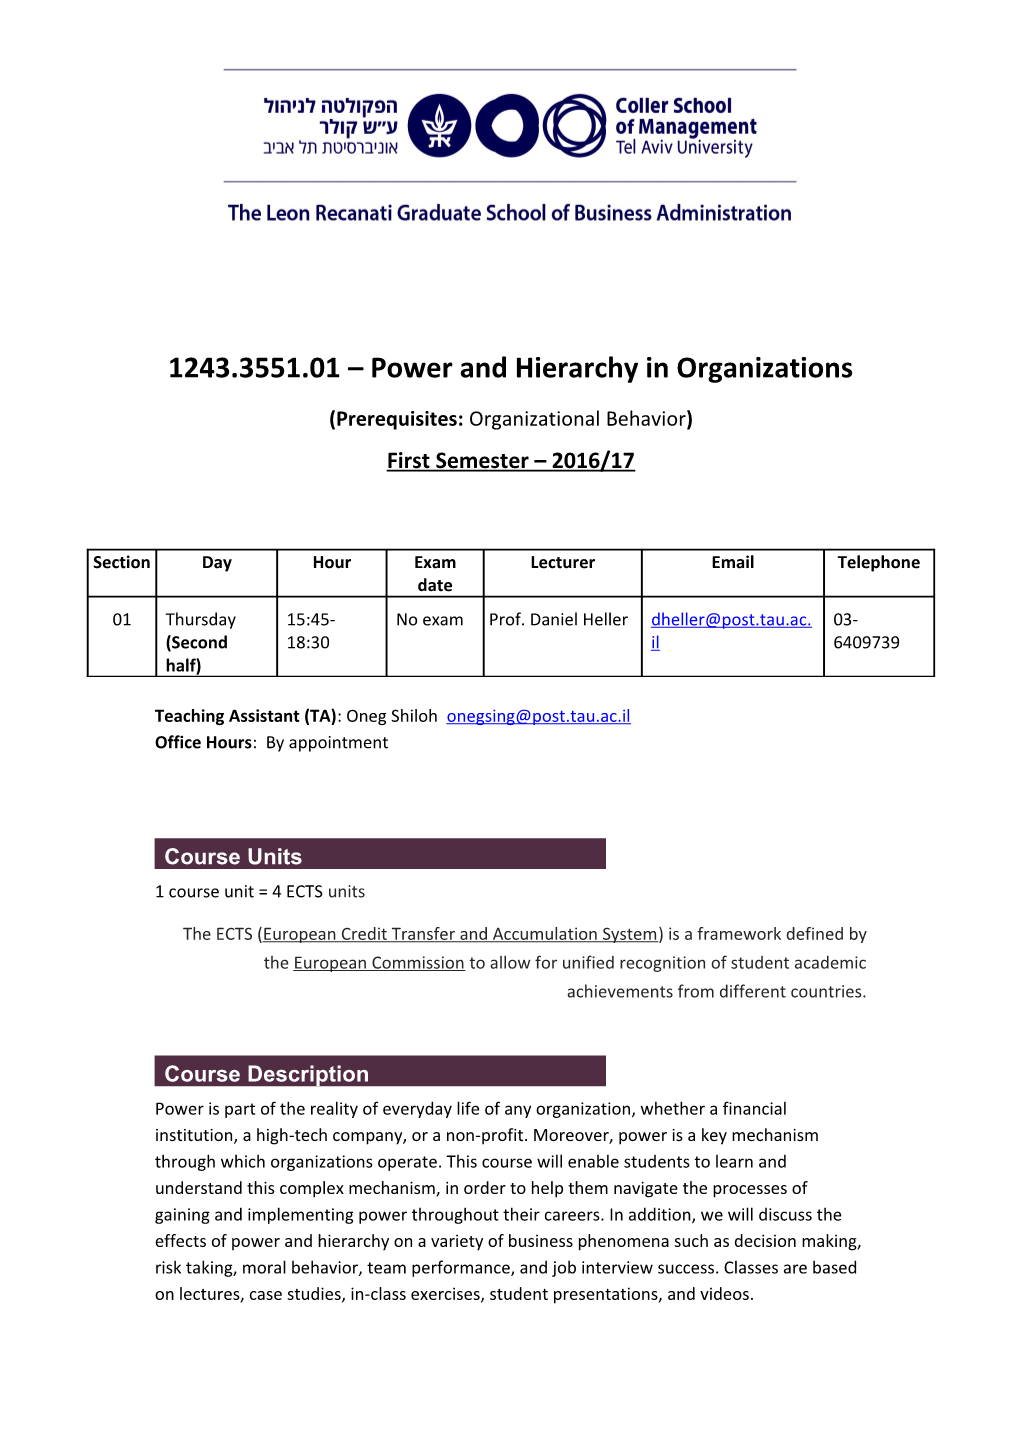 1243.3551.01 Power and Hierarchy in Organizations